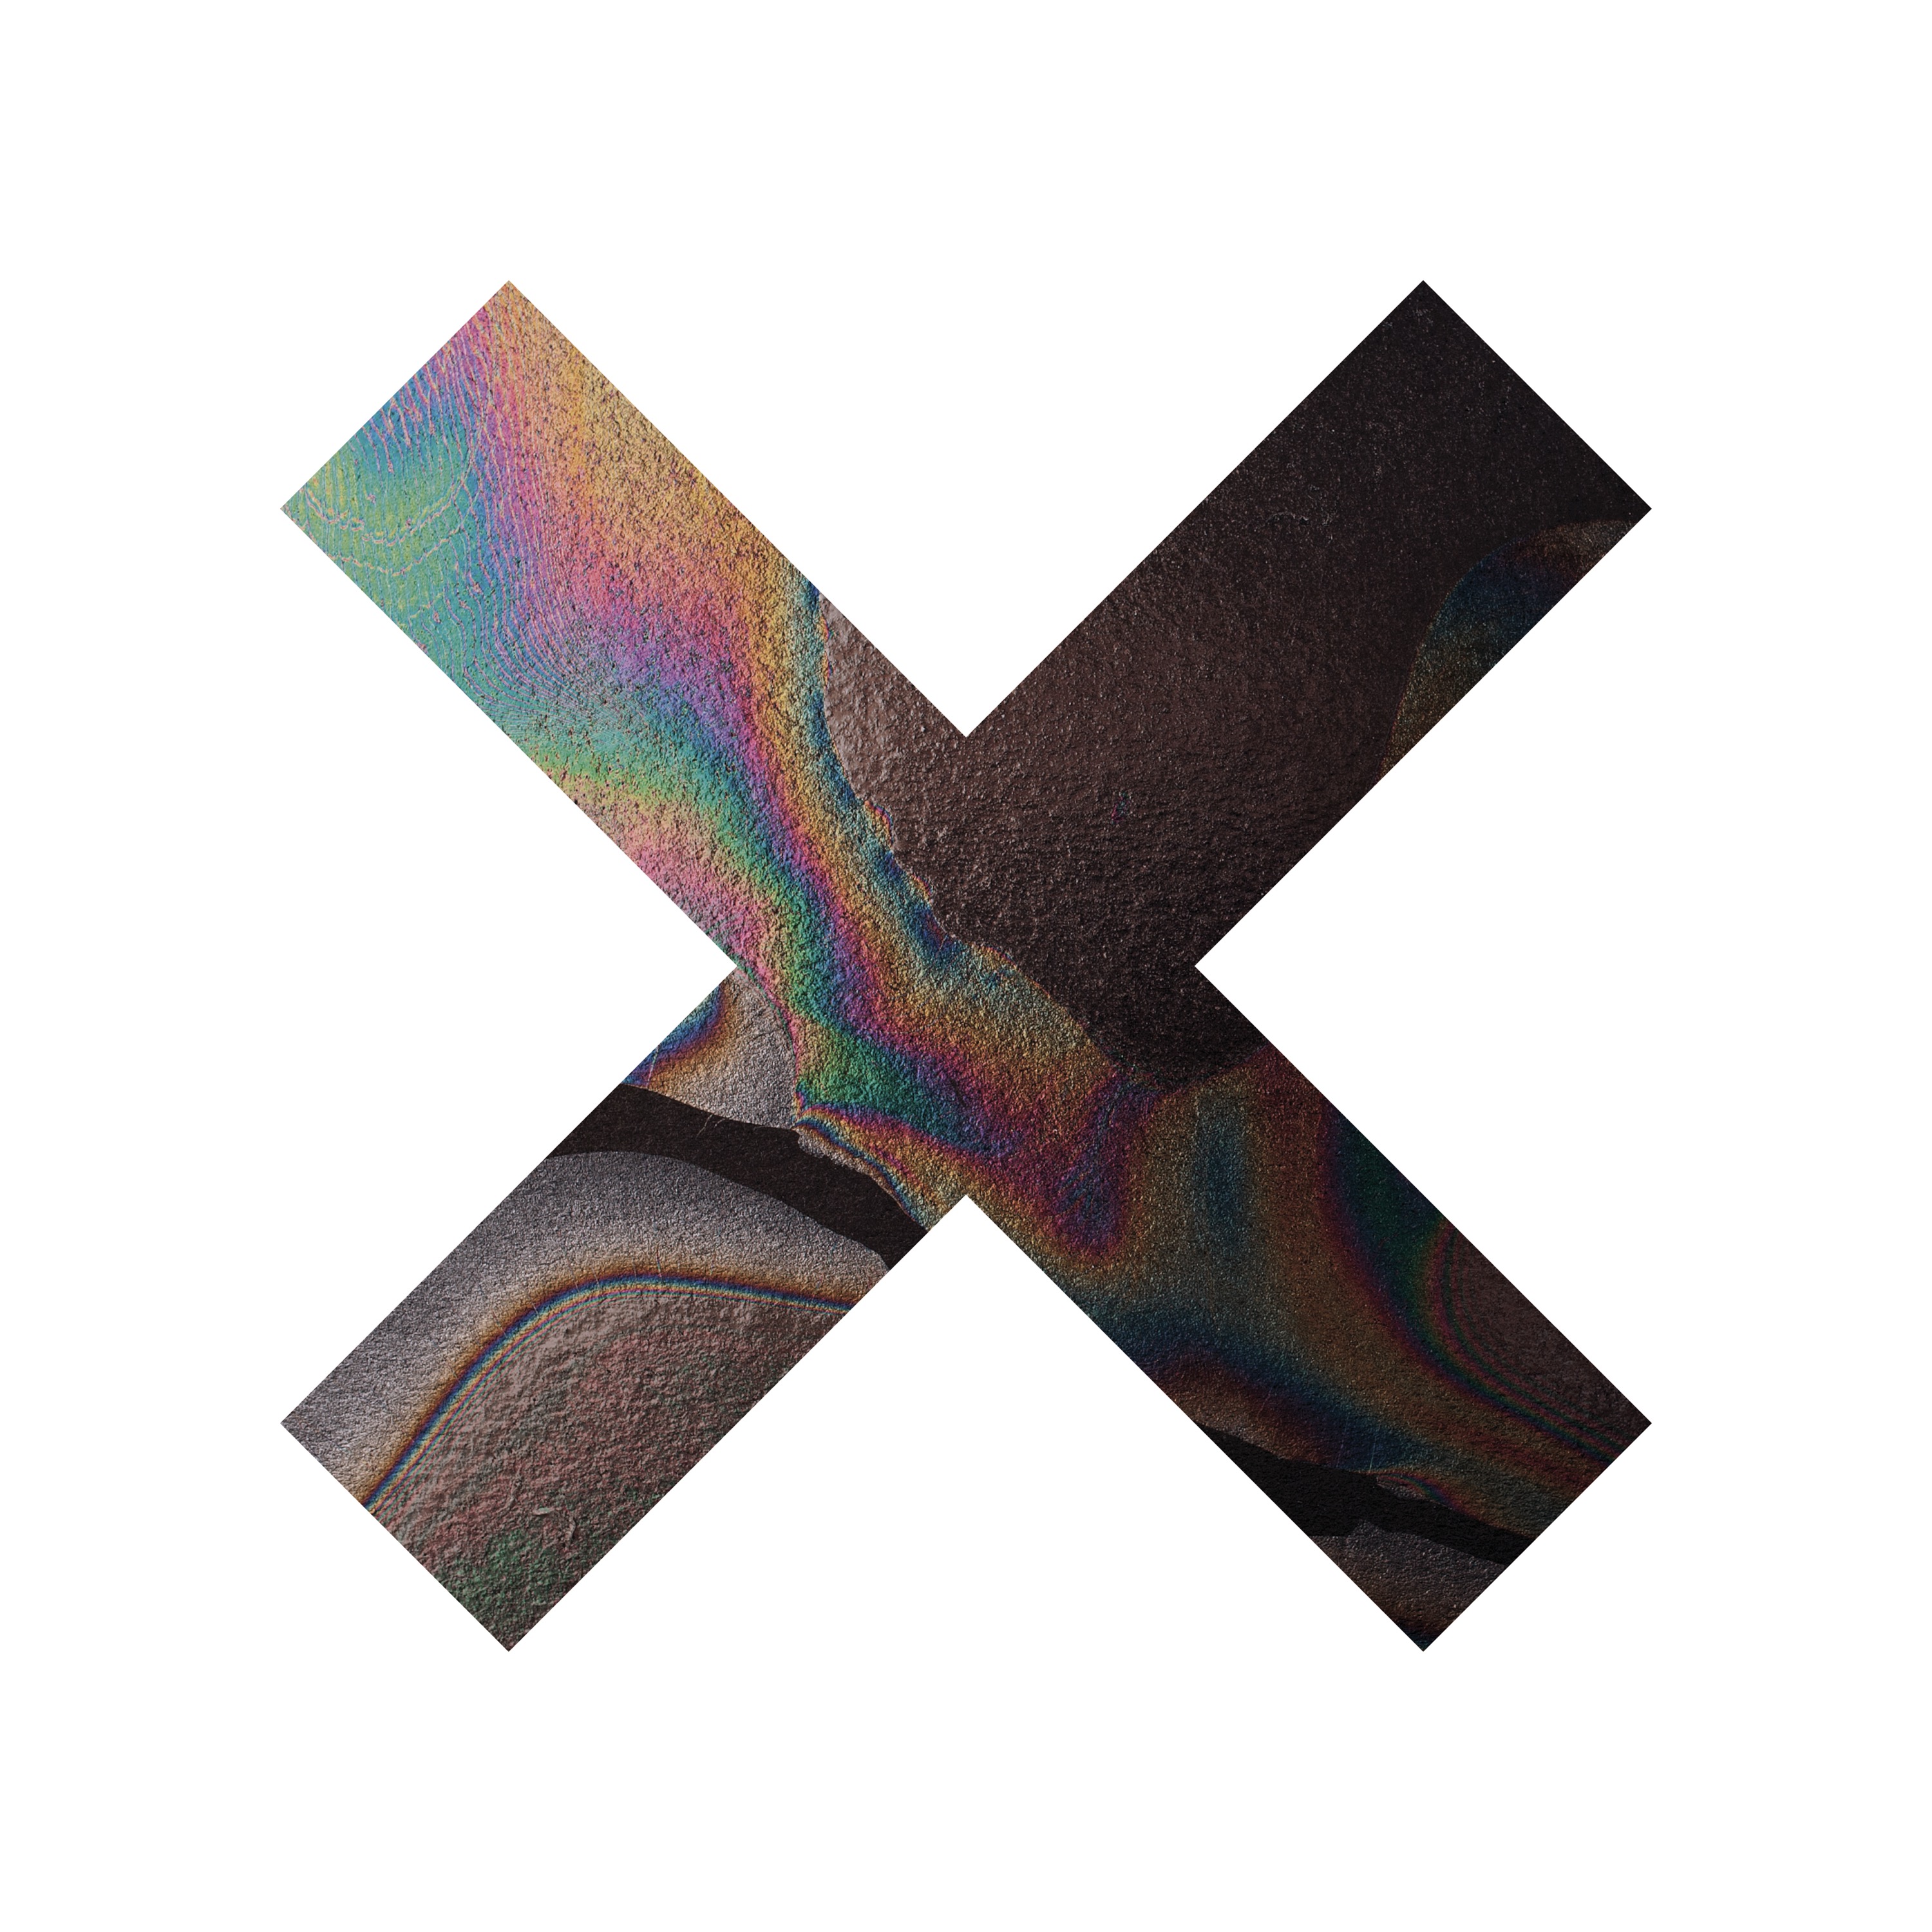 The xx - Coexist (Limited Edition 10th Anniv